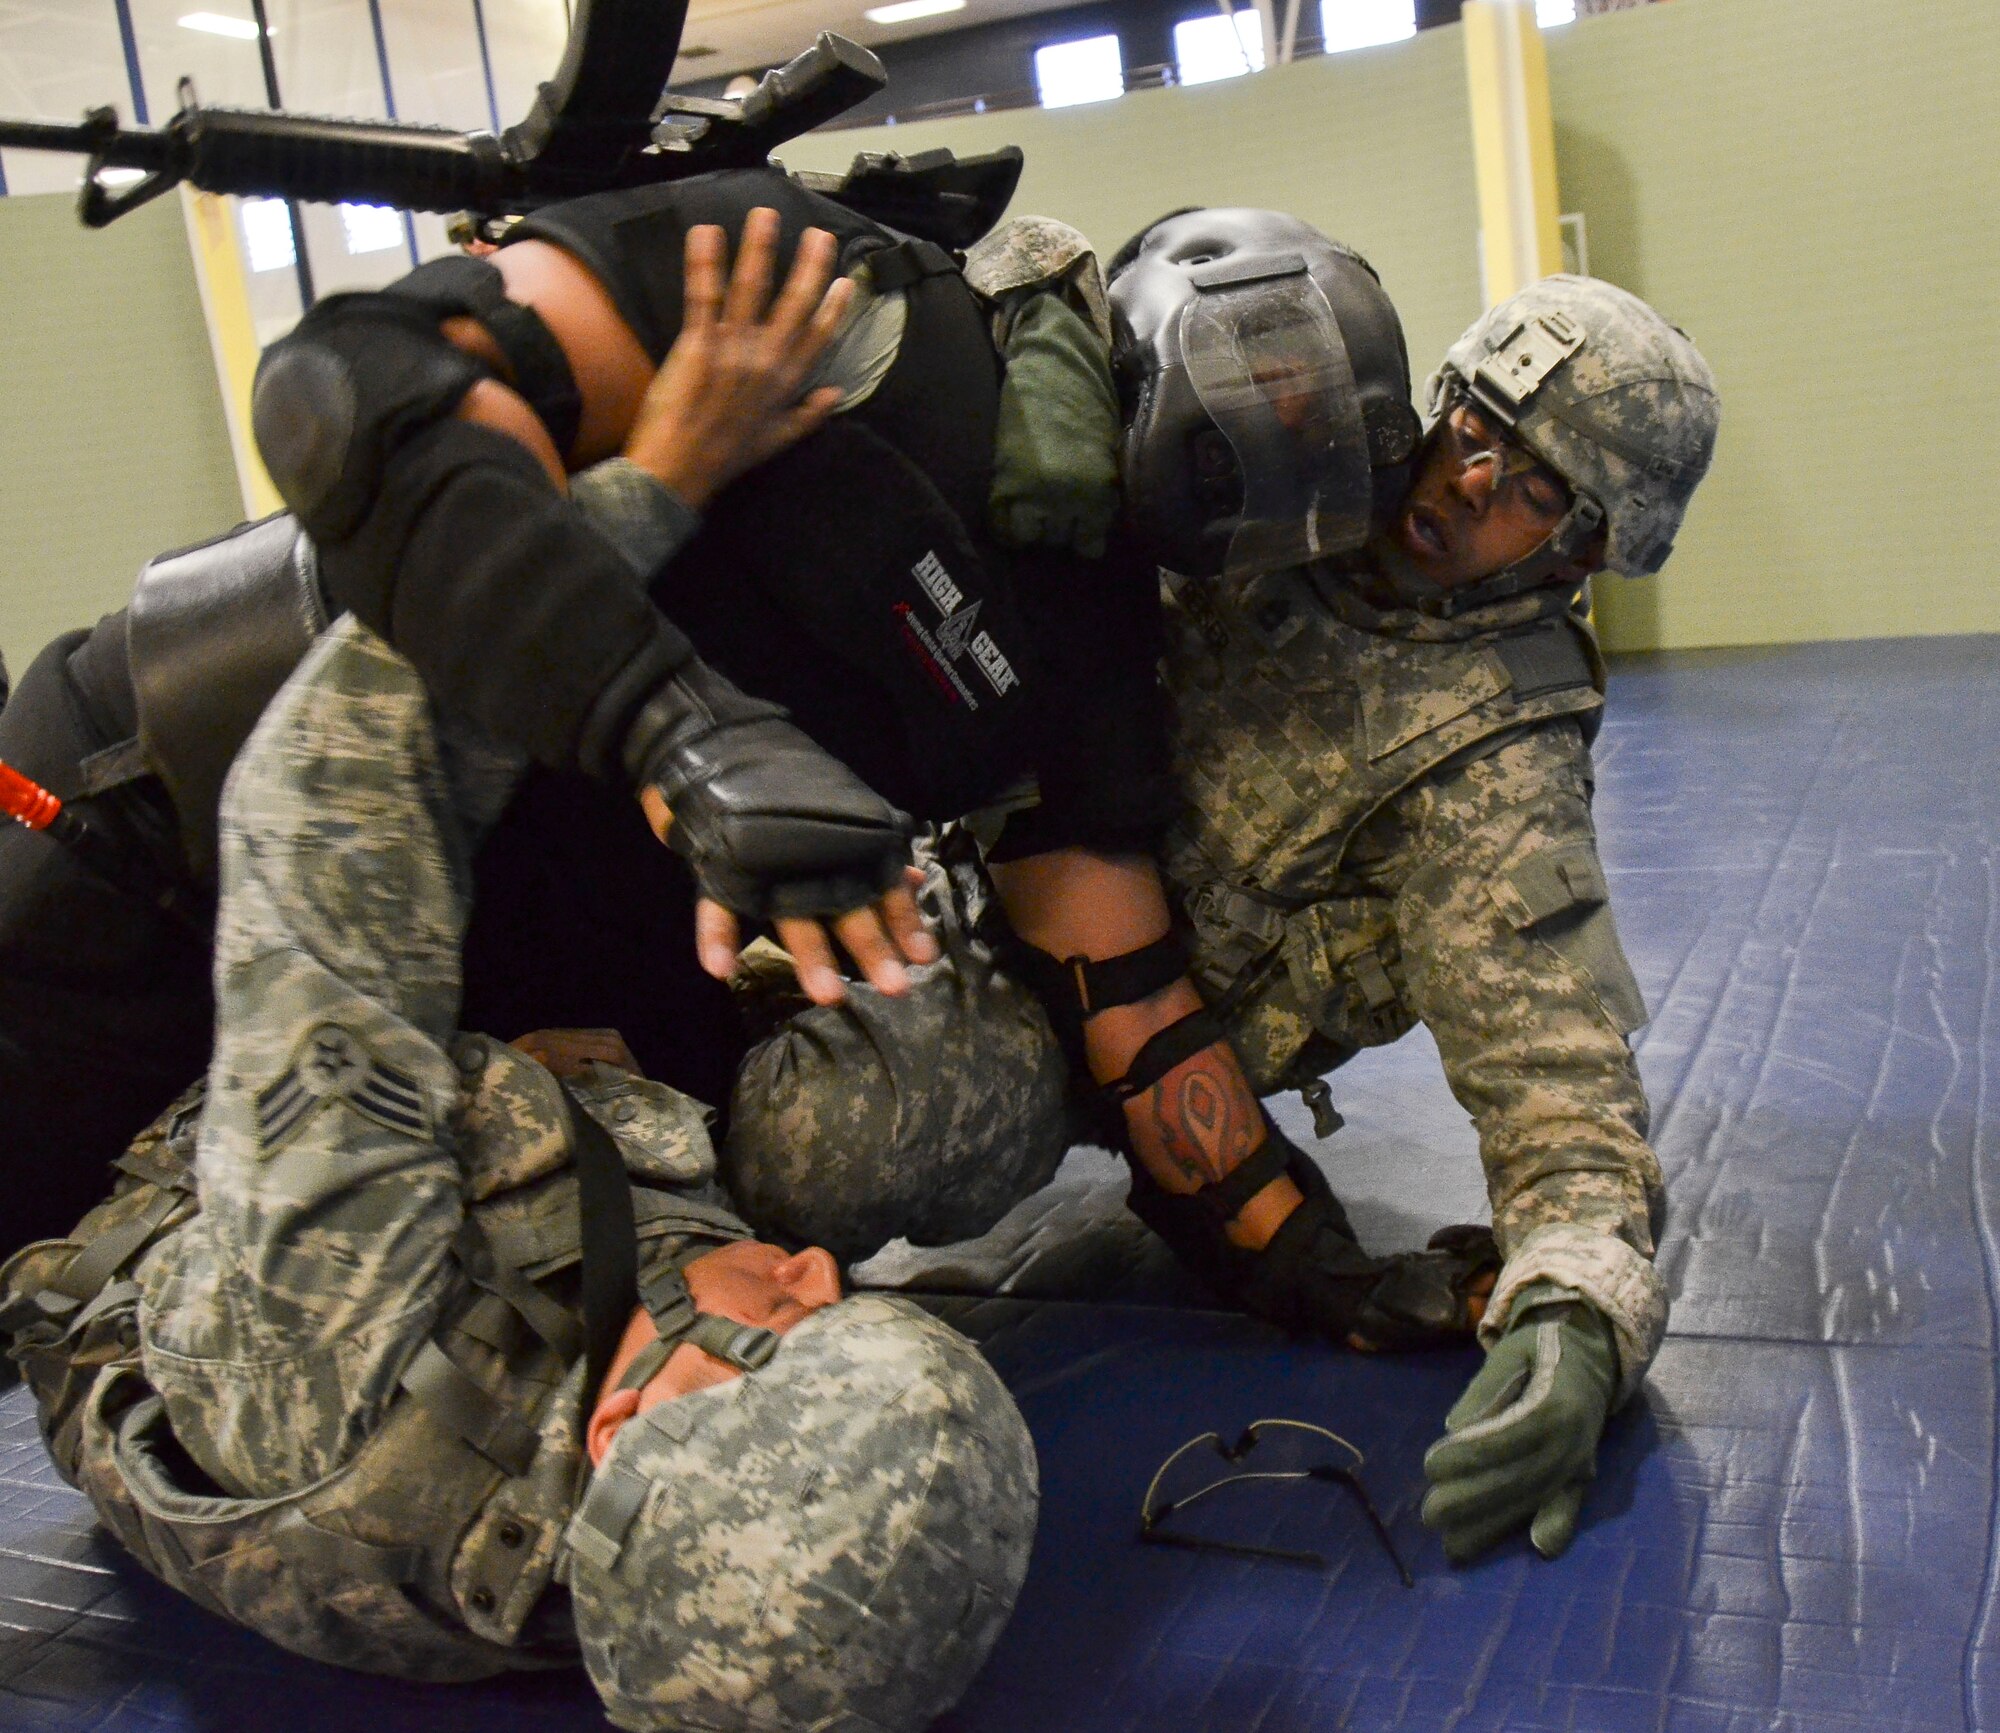 Senior Airman Savas Rivera, 612th Support Squadron, along with Capt. Carlos Semidey,  1st Battlefield Coordination Detachment, wrestle with a non compliant combative during the Modern Army Combatives Program (MACP) Basic Combatives Course Level 1 at Davis-Monthan Air Force Base, Ariz., Jan. 16, 2014. The 40-hour course focuses on the three phases of basic fighting strategy; close the distance, gain the dominate position, and how to finish the fight. (U.S. Air Force photo by Staff Sgt. Adam Grant/Released)